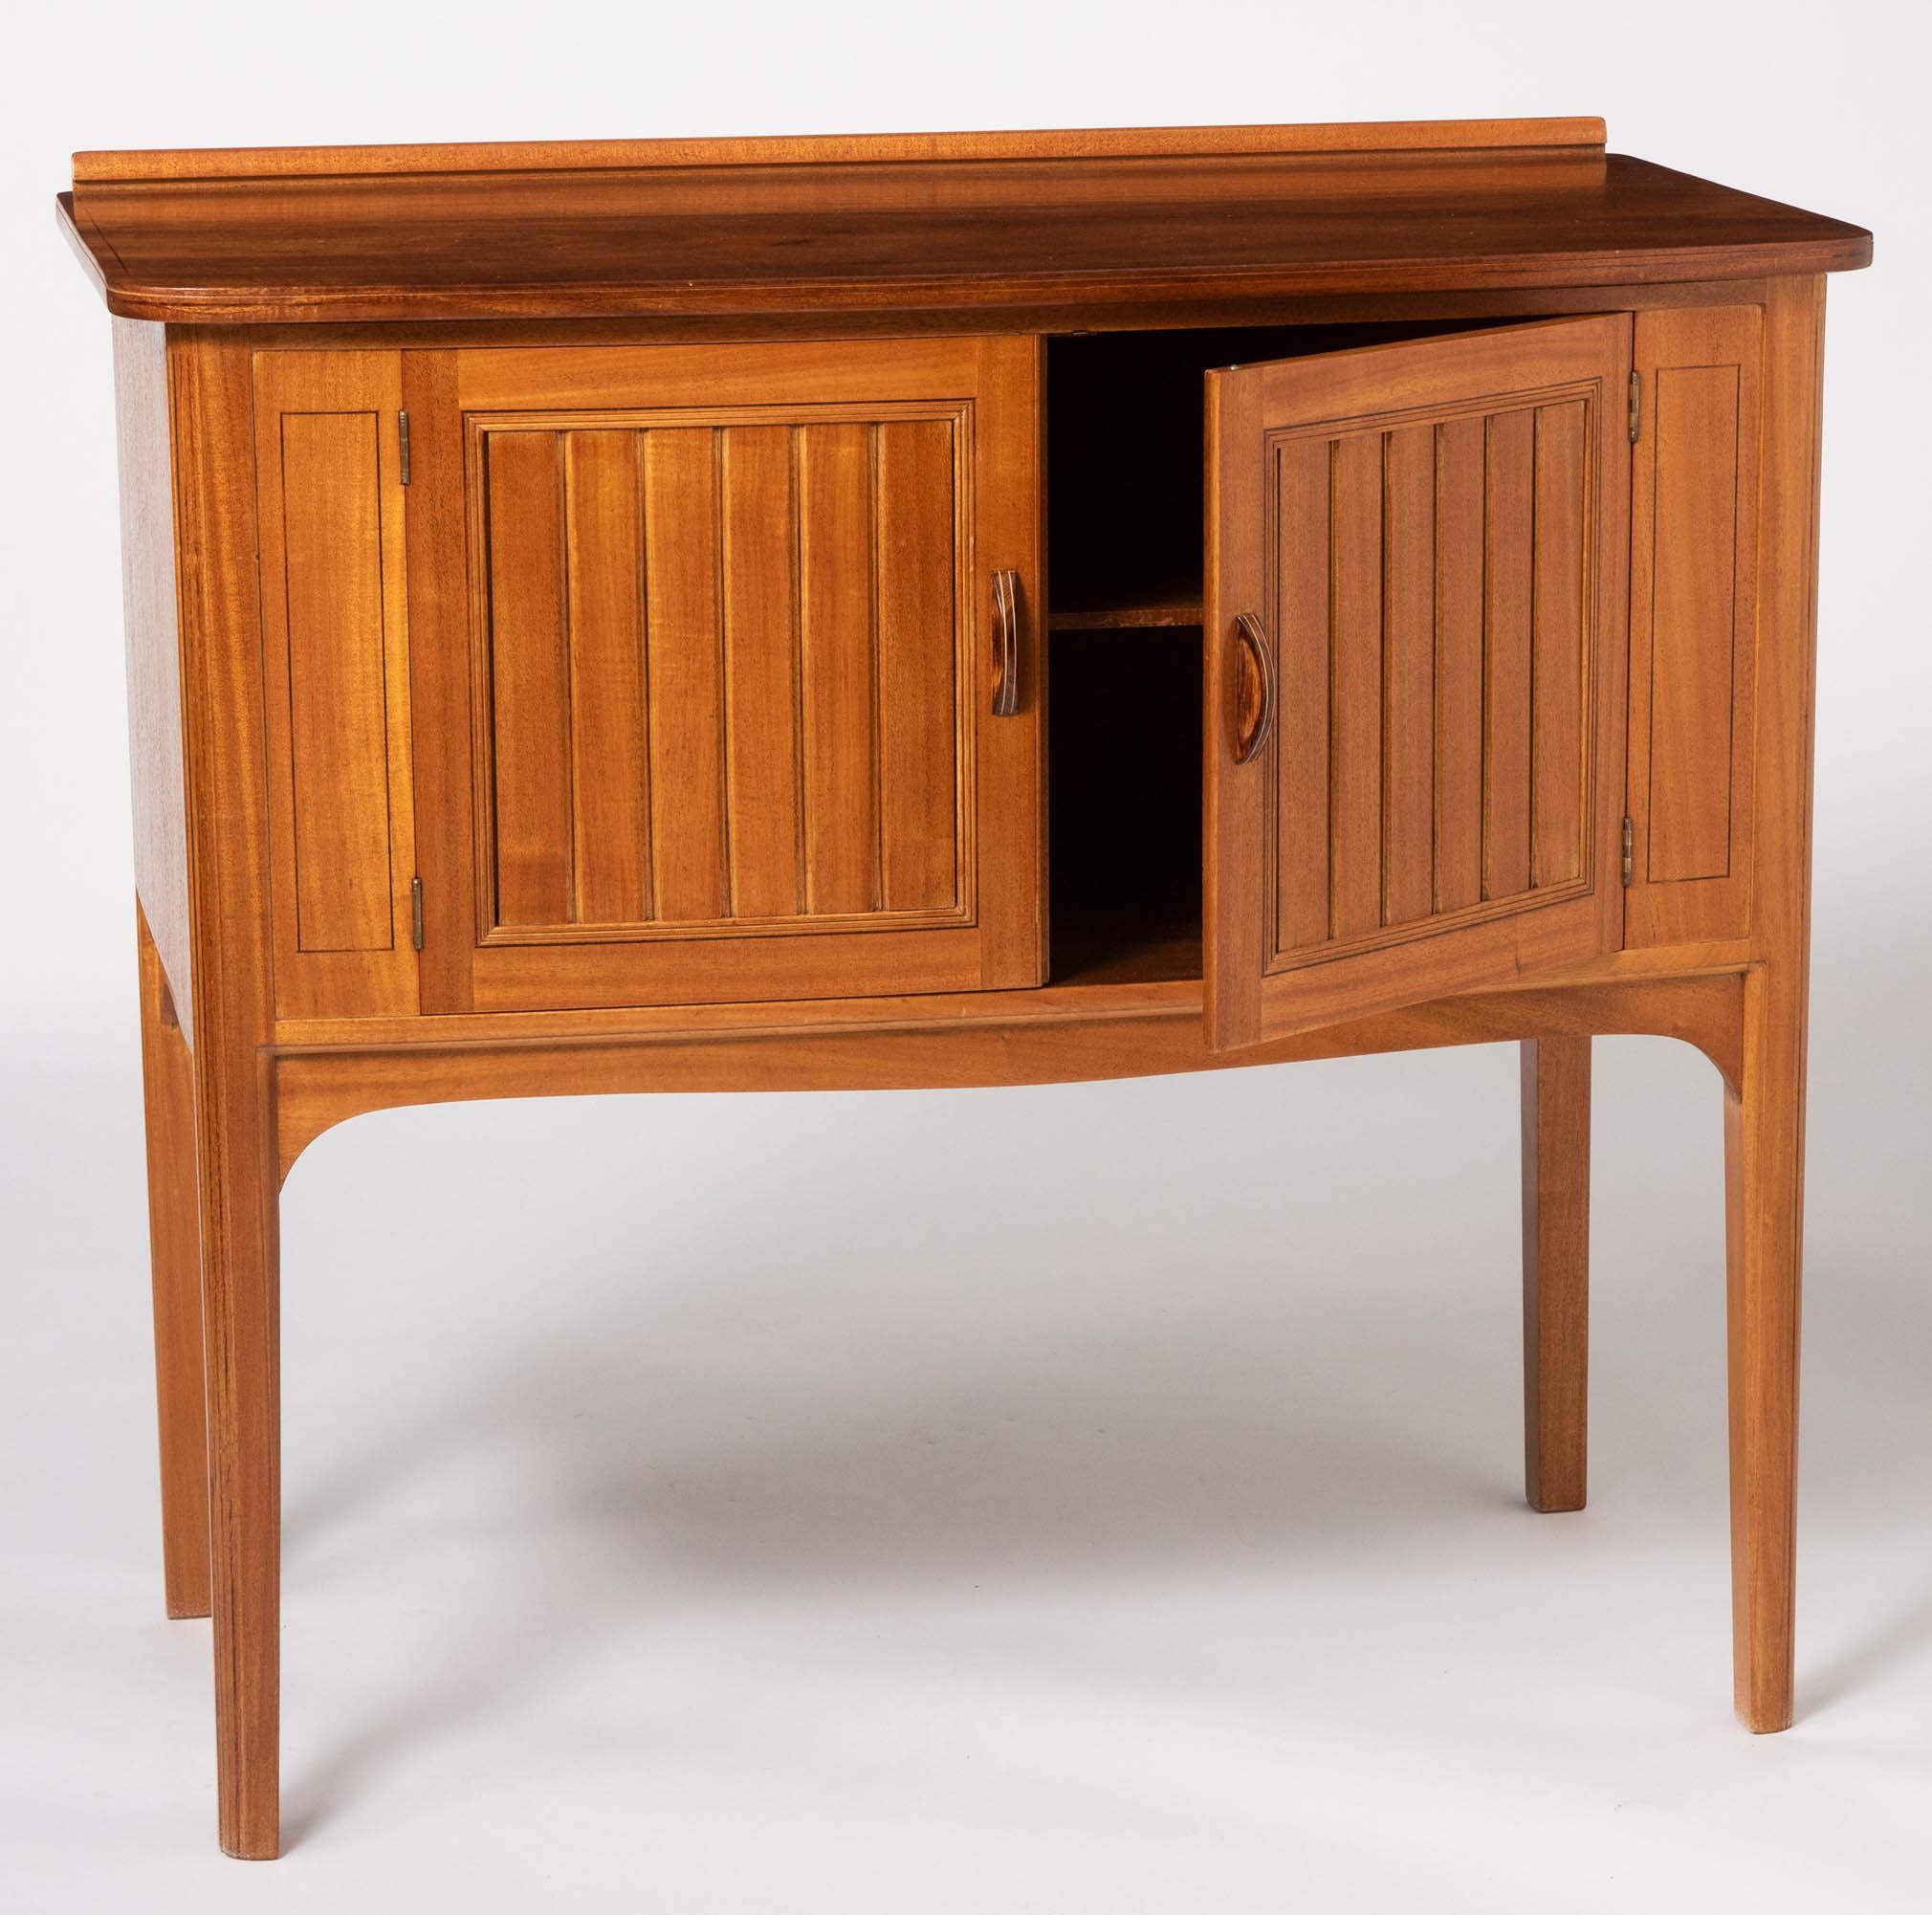 English Pair of African Mahogany Side Cabinets by Edward Barnsley, England, circa 1956 For Sale